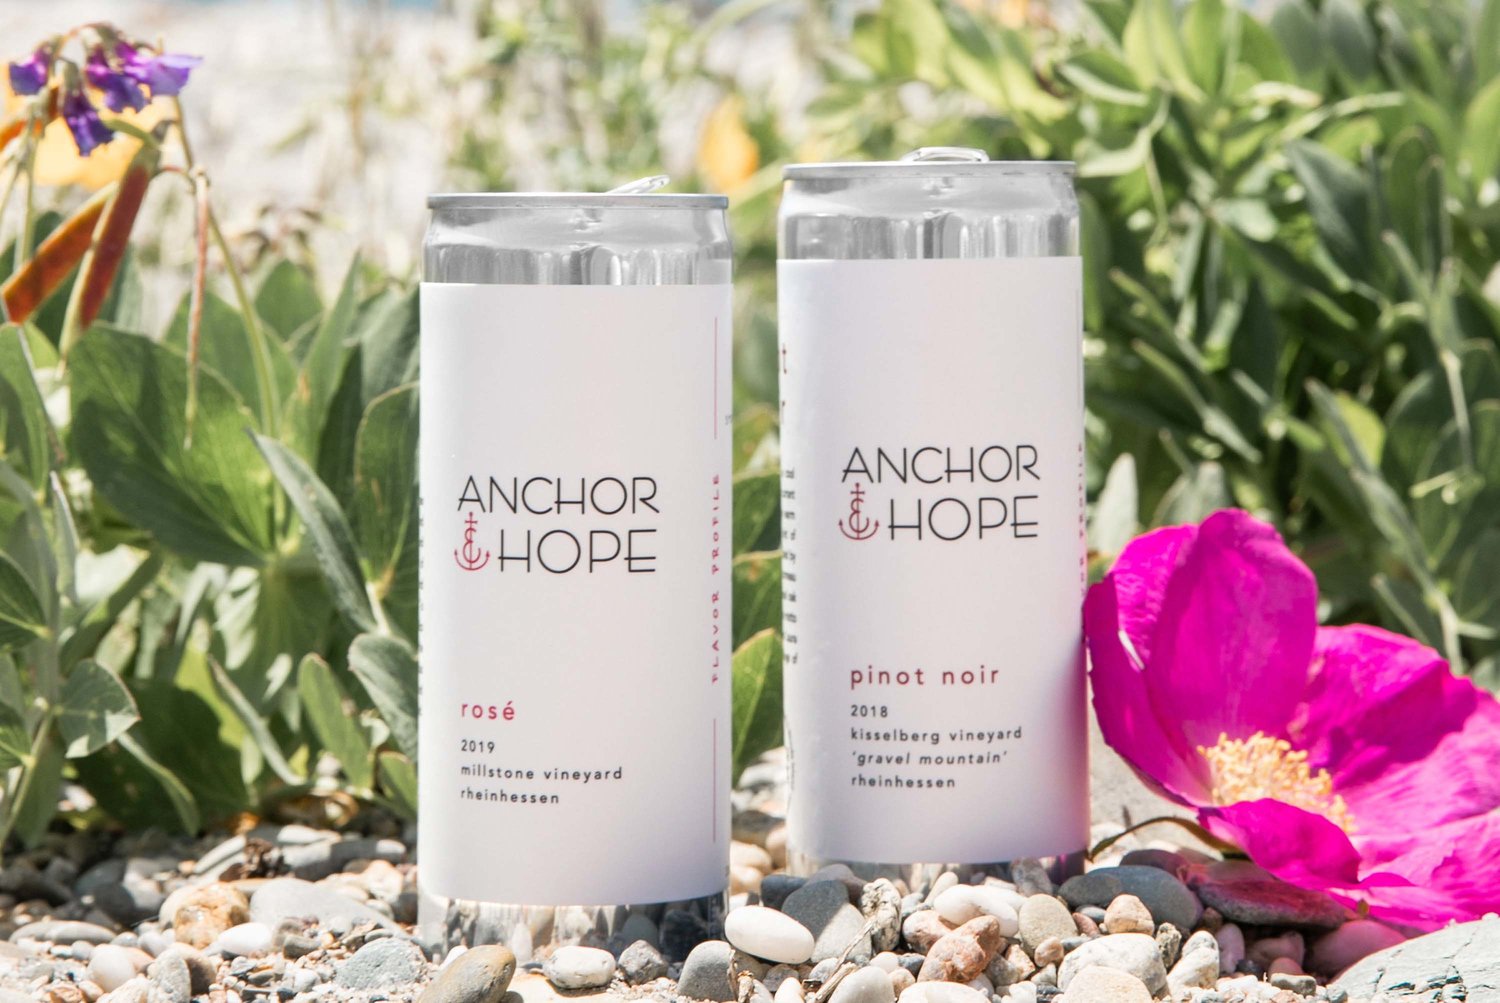 Anchor & Hope wines come by the bottle or can